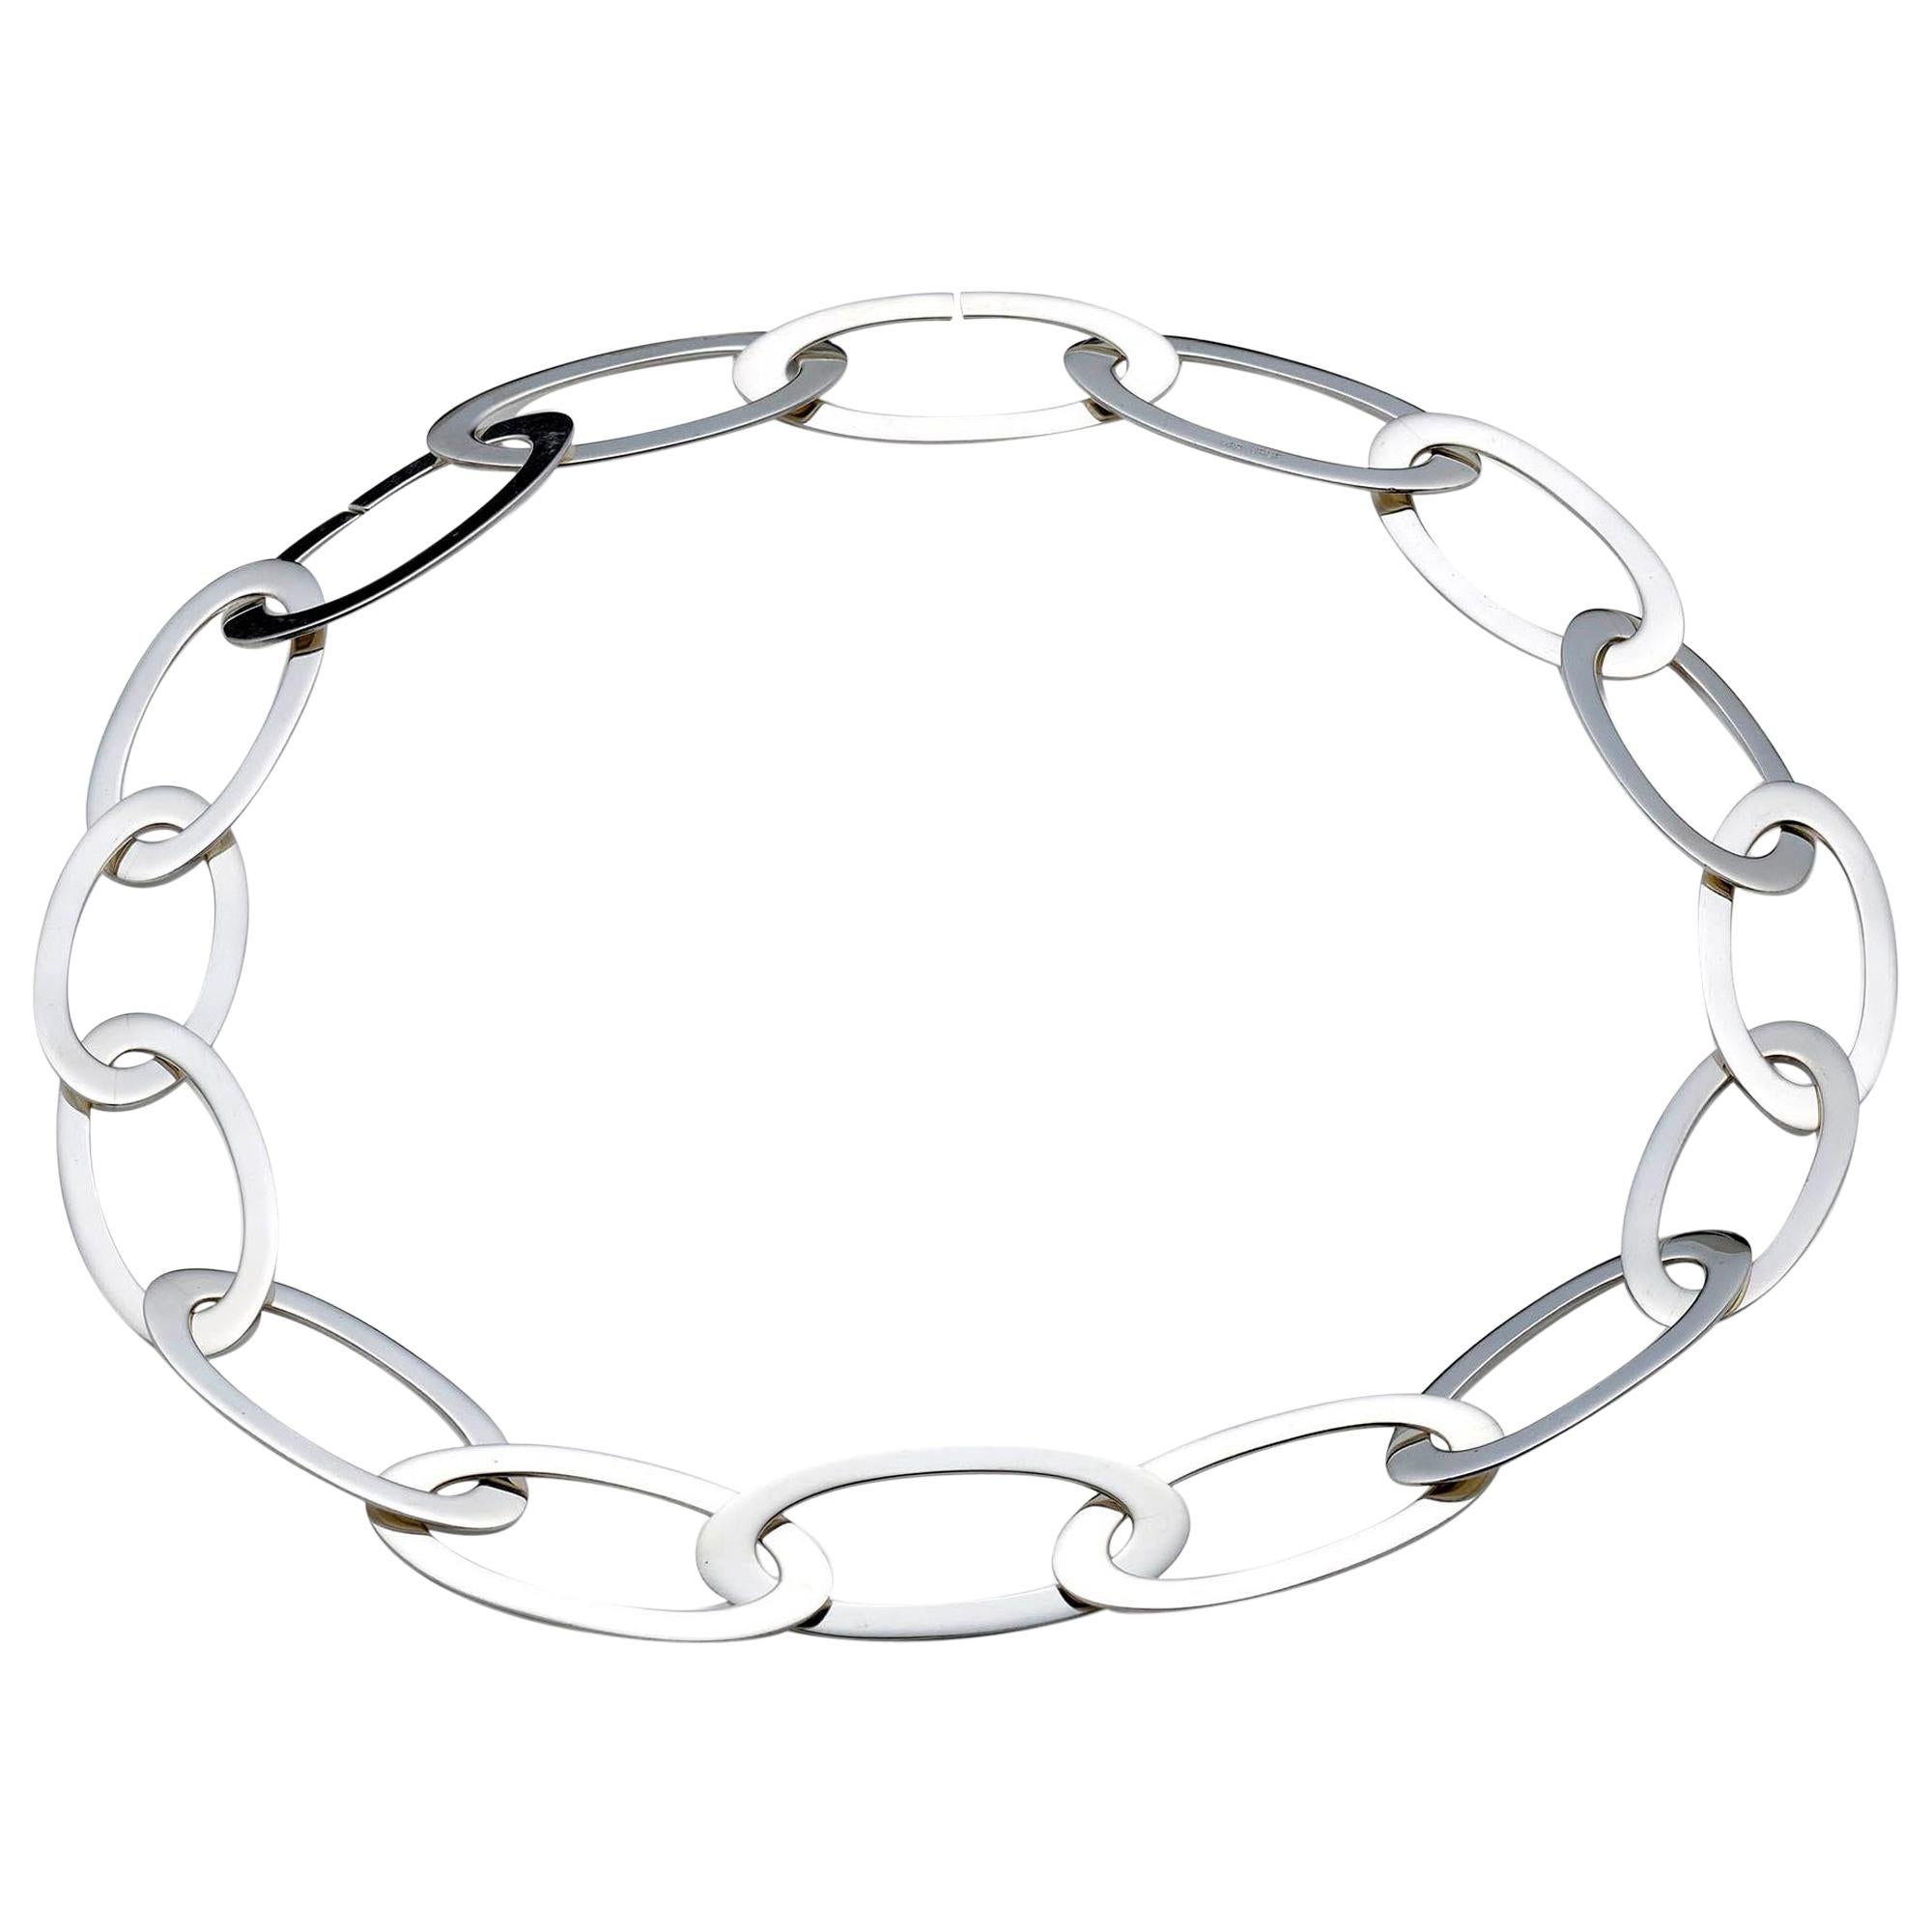 Sleek, Contemporary Flat Oval Link Necklace